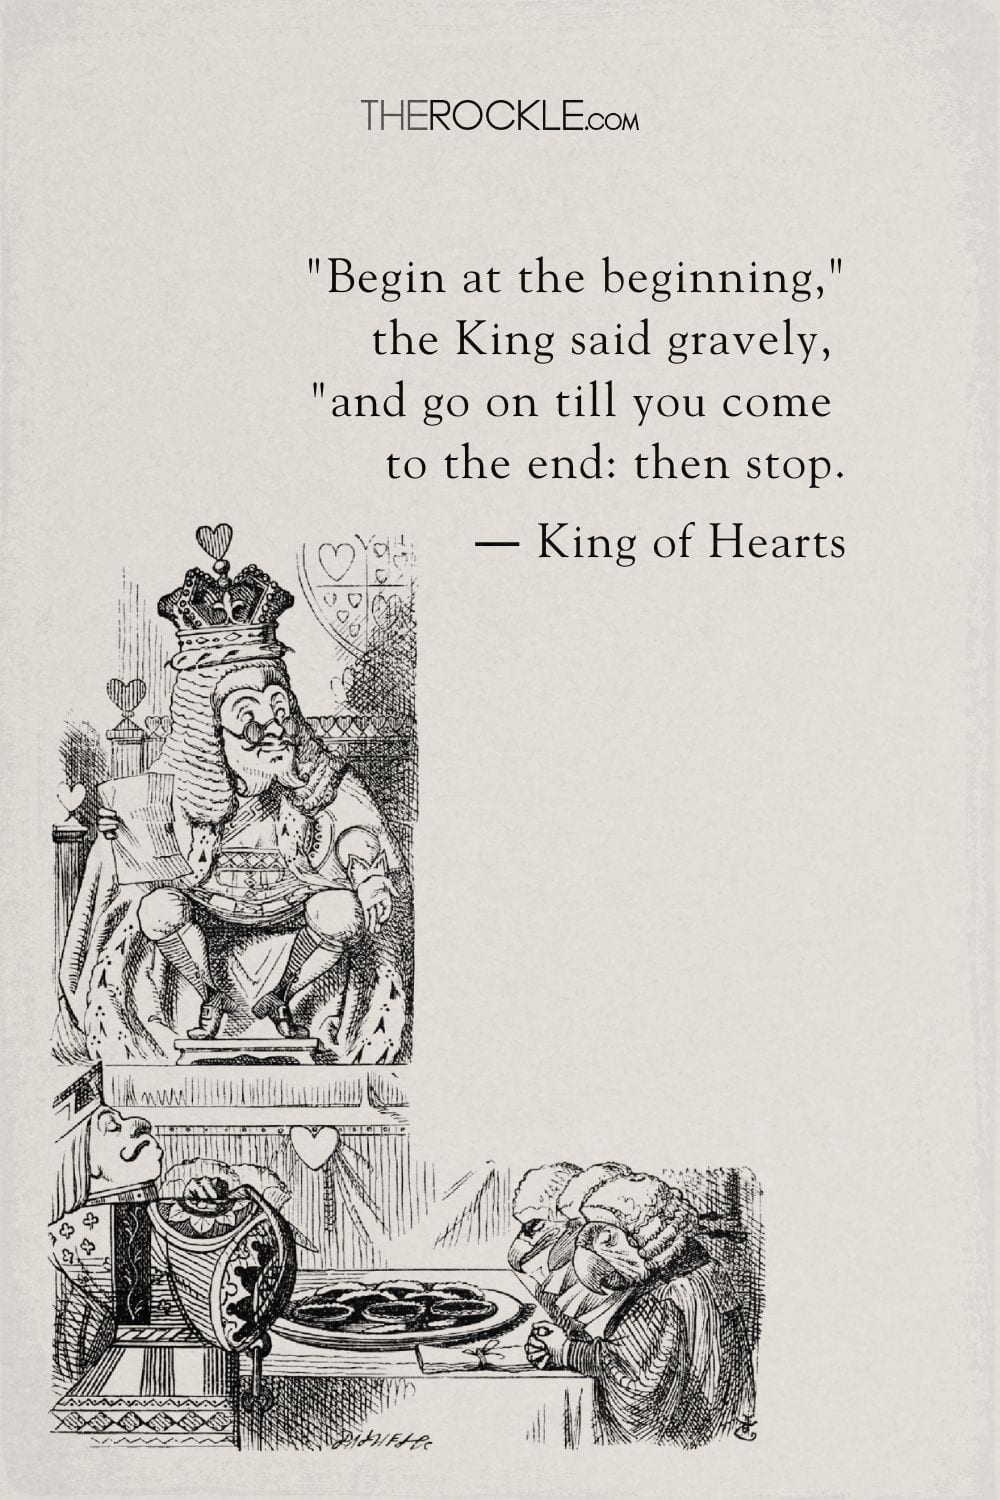 The King of Hearts quote